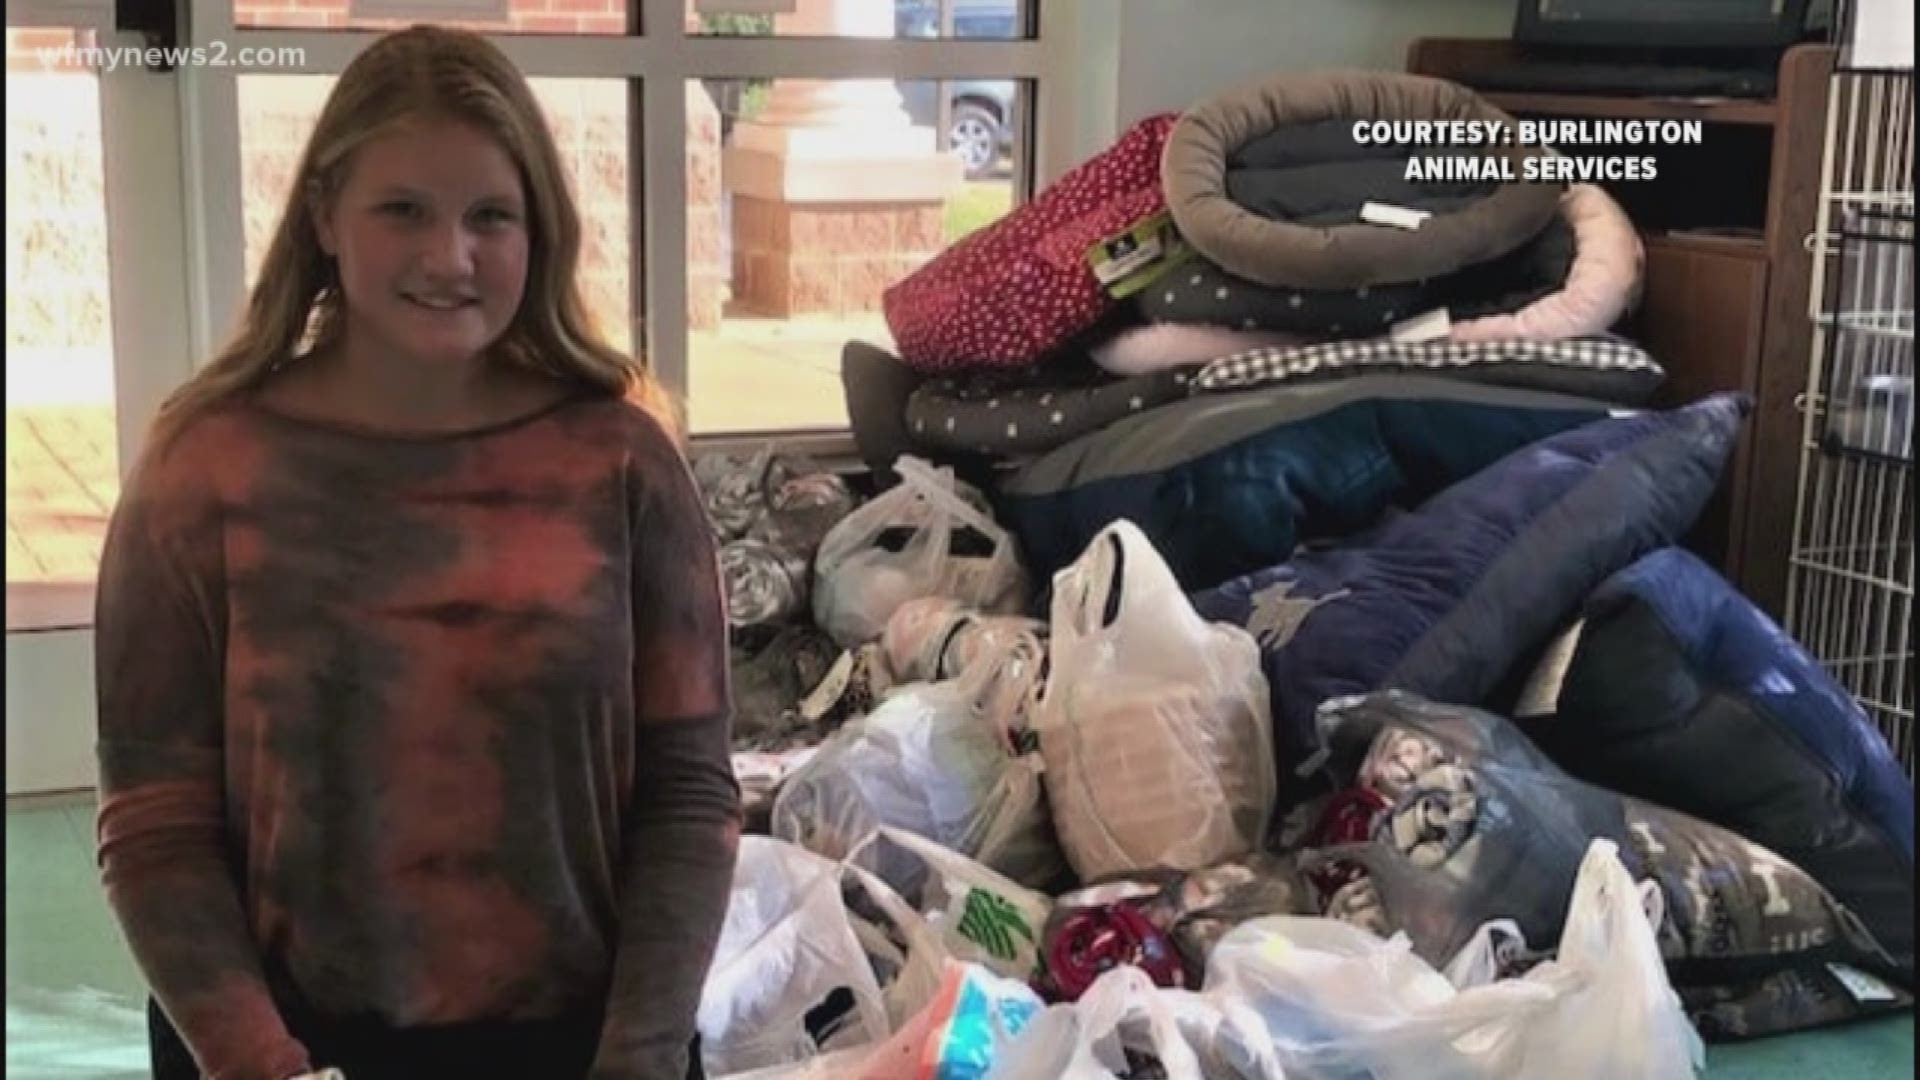 She just celebrated her 16th birthday, but she doesn't get gifts. She donates to Burlington animal services.